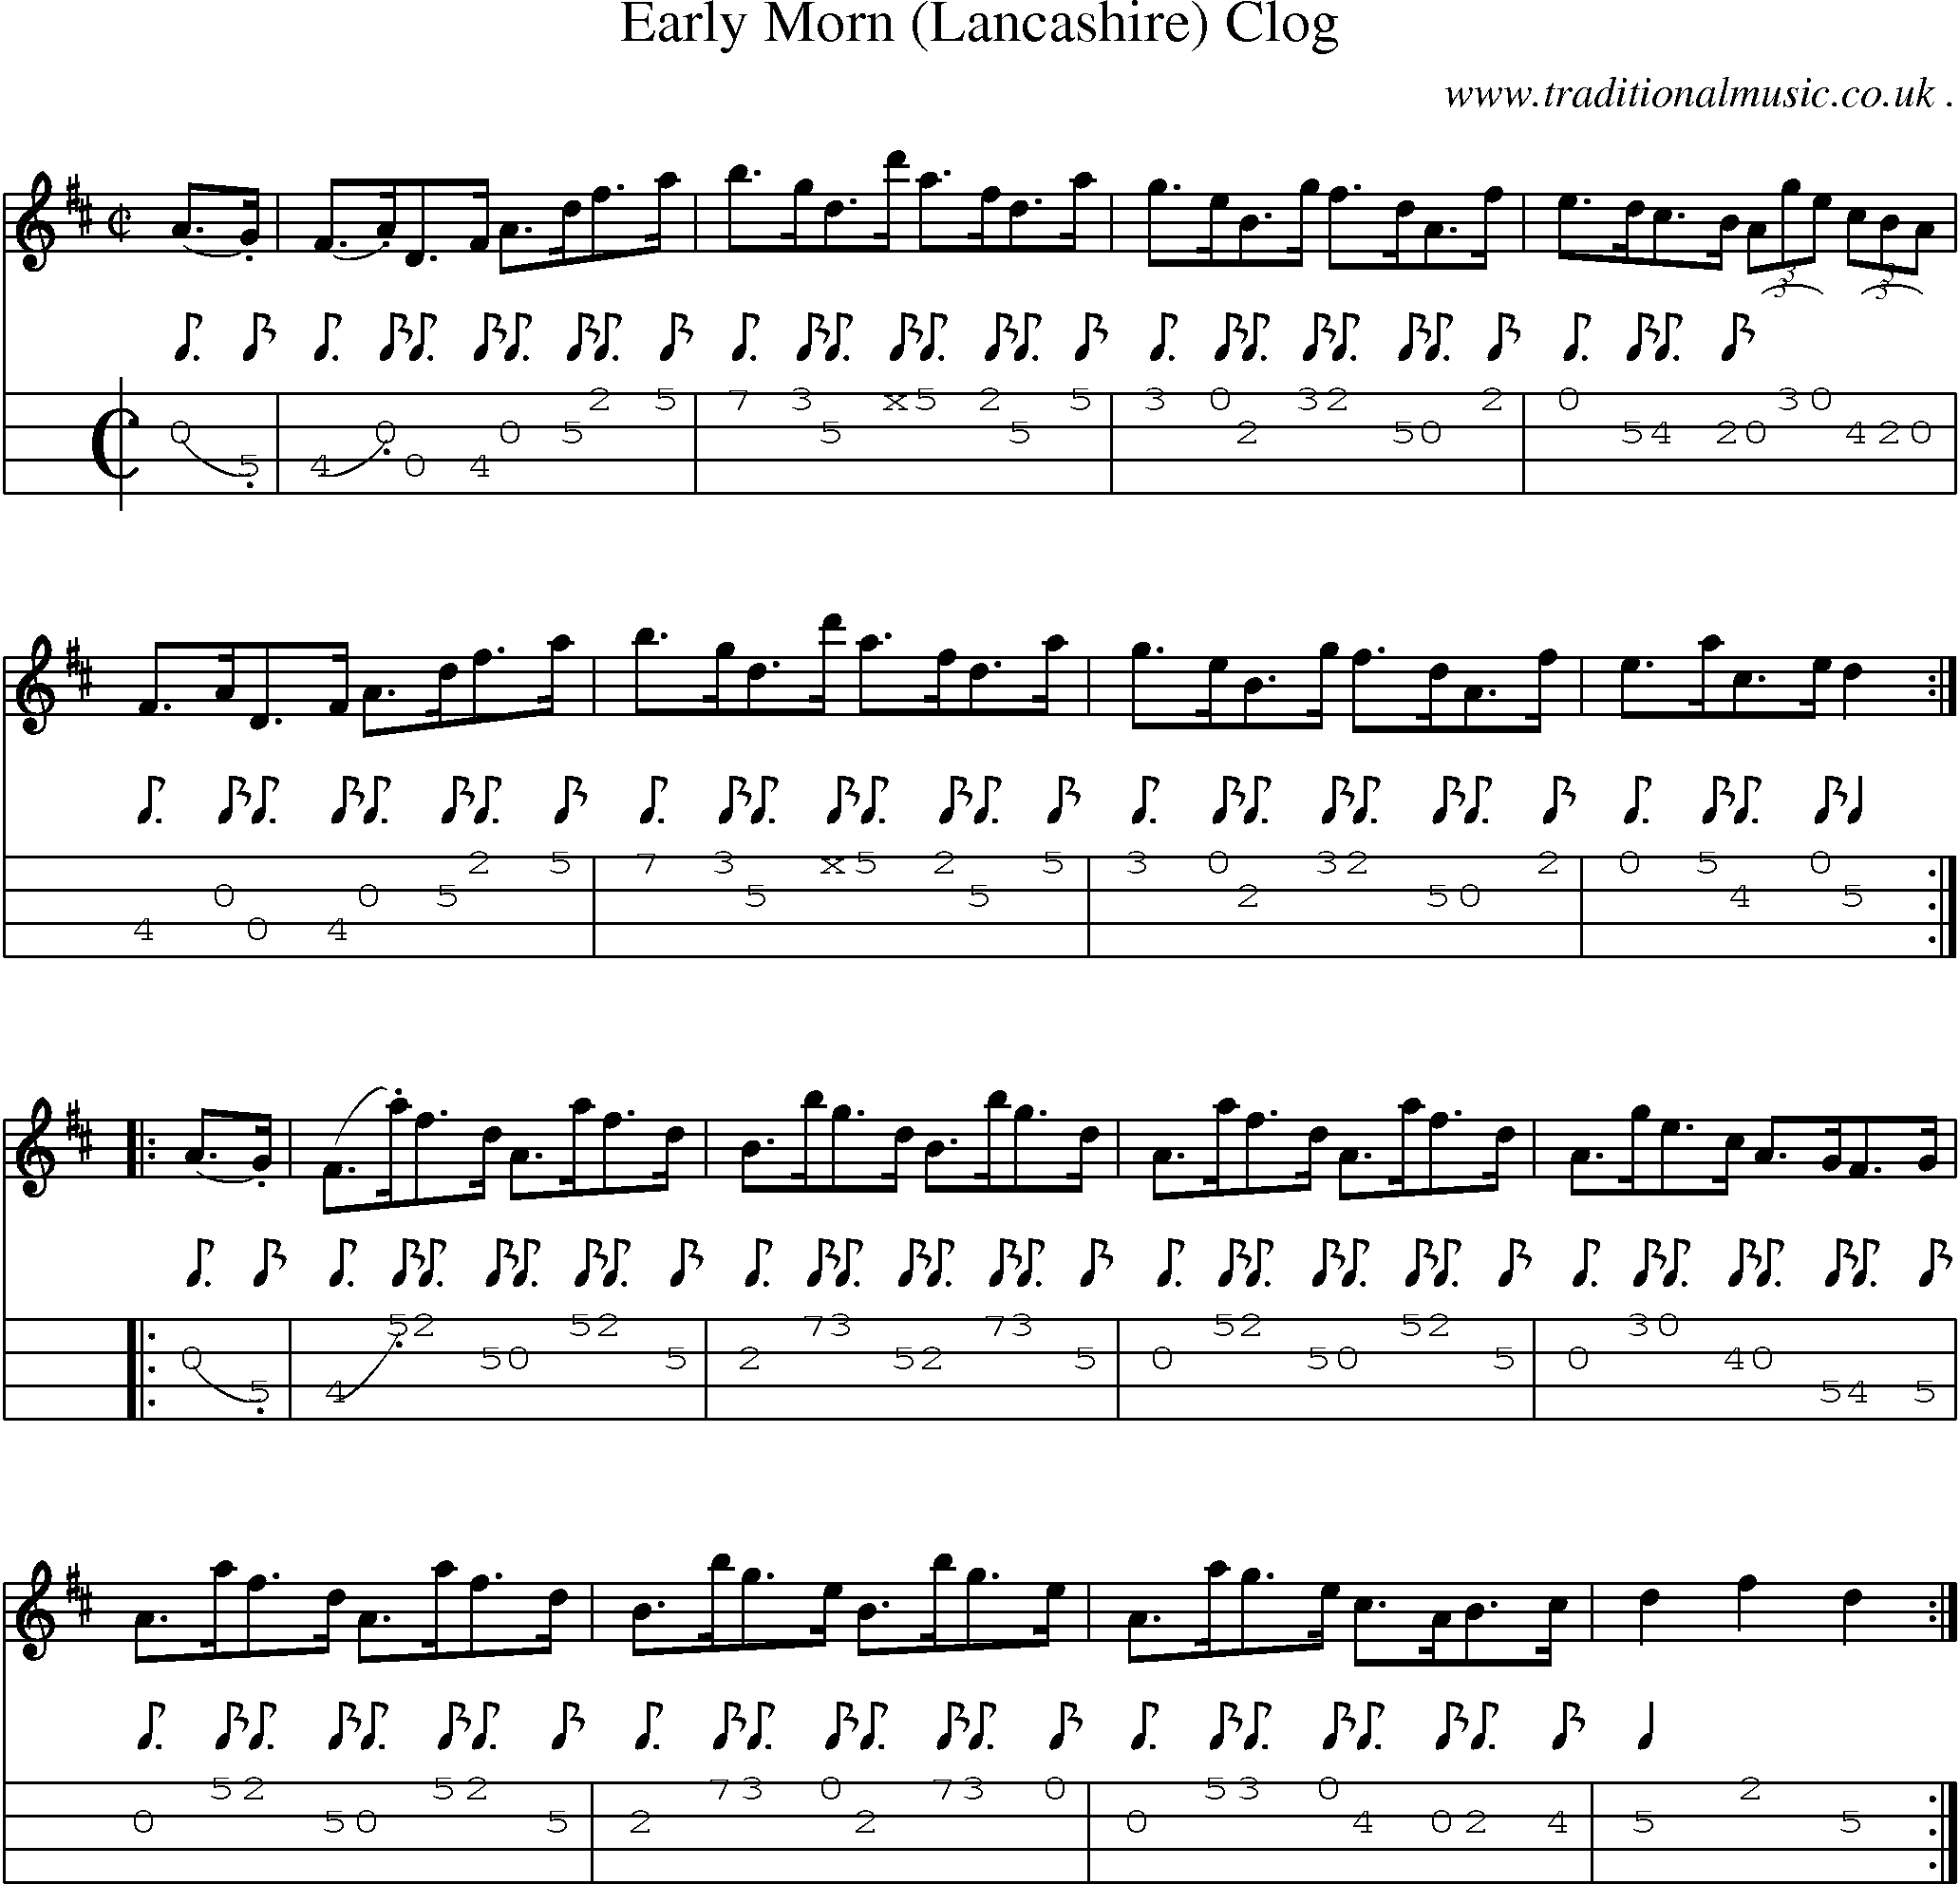 Sheet-Music and Mandolin Tabs for Early Morn (lancashire) Clog